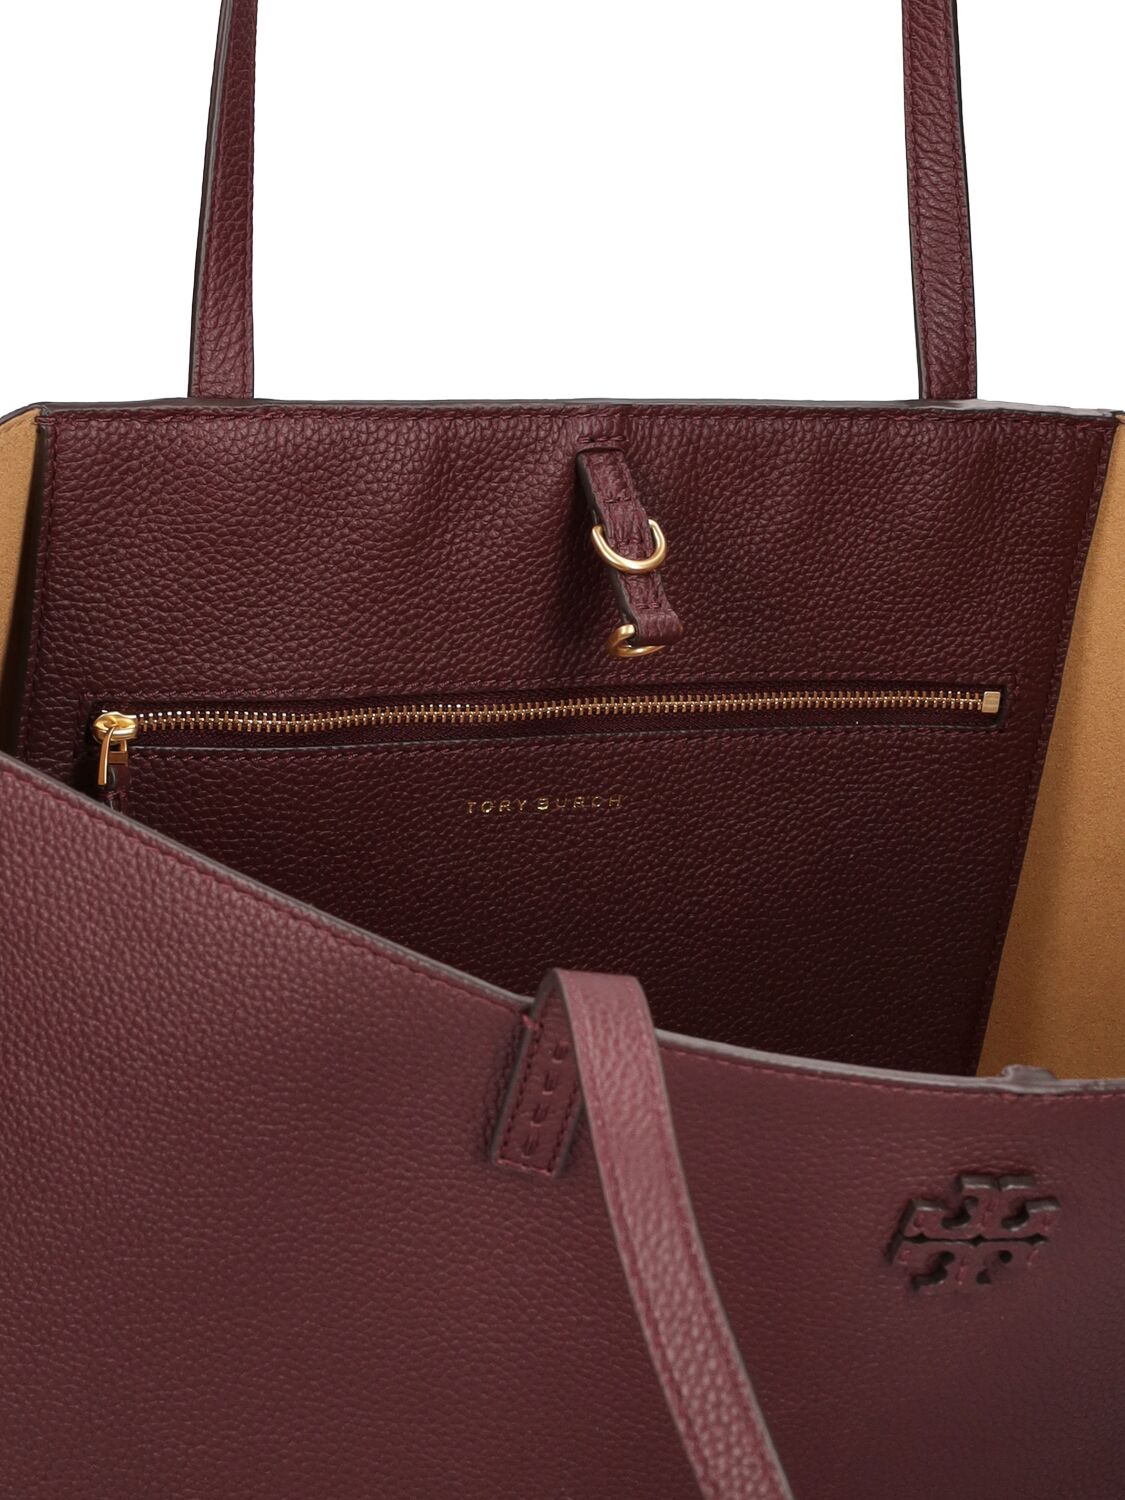 Shop Tory Burch Mcgraw Leather Tote Bag In Bordeaux